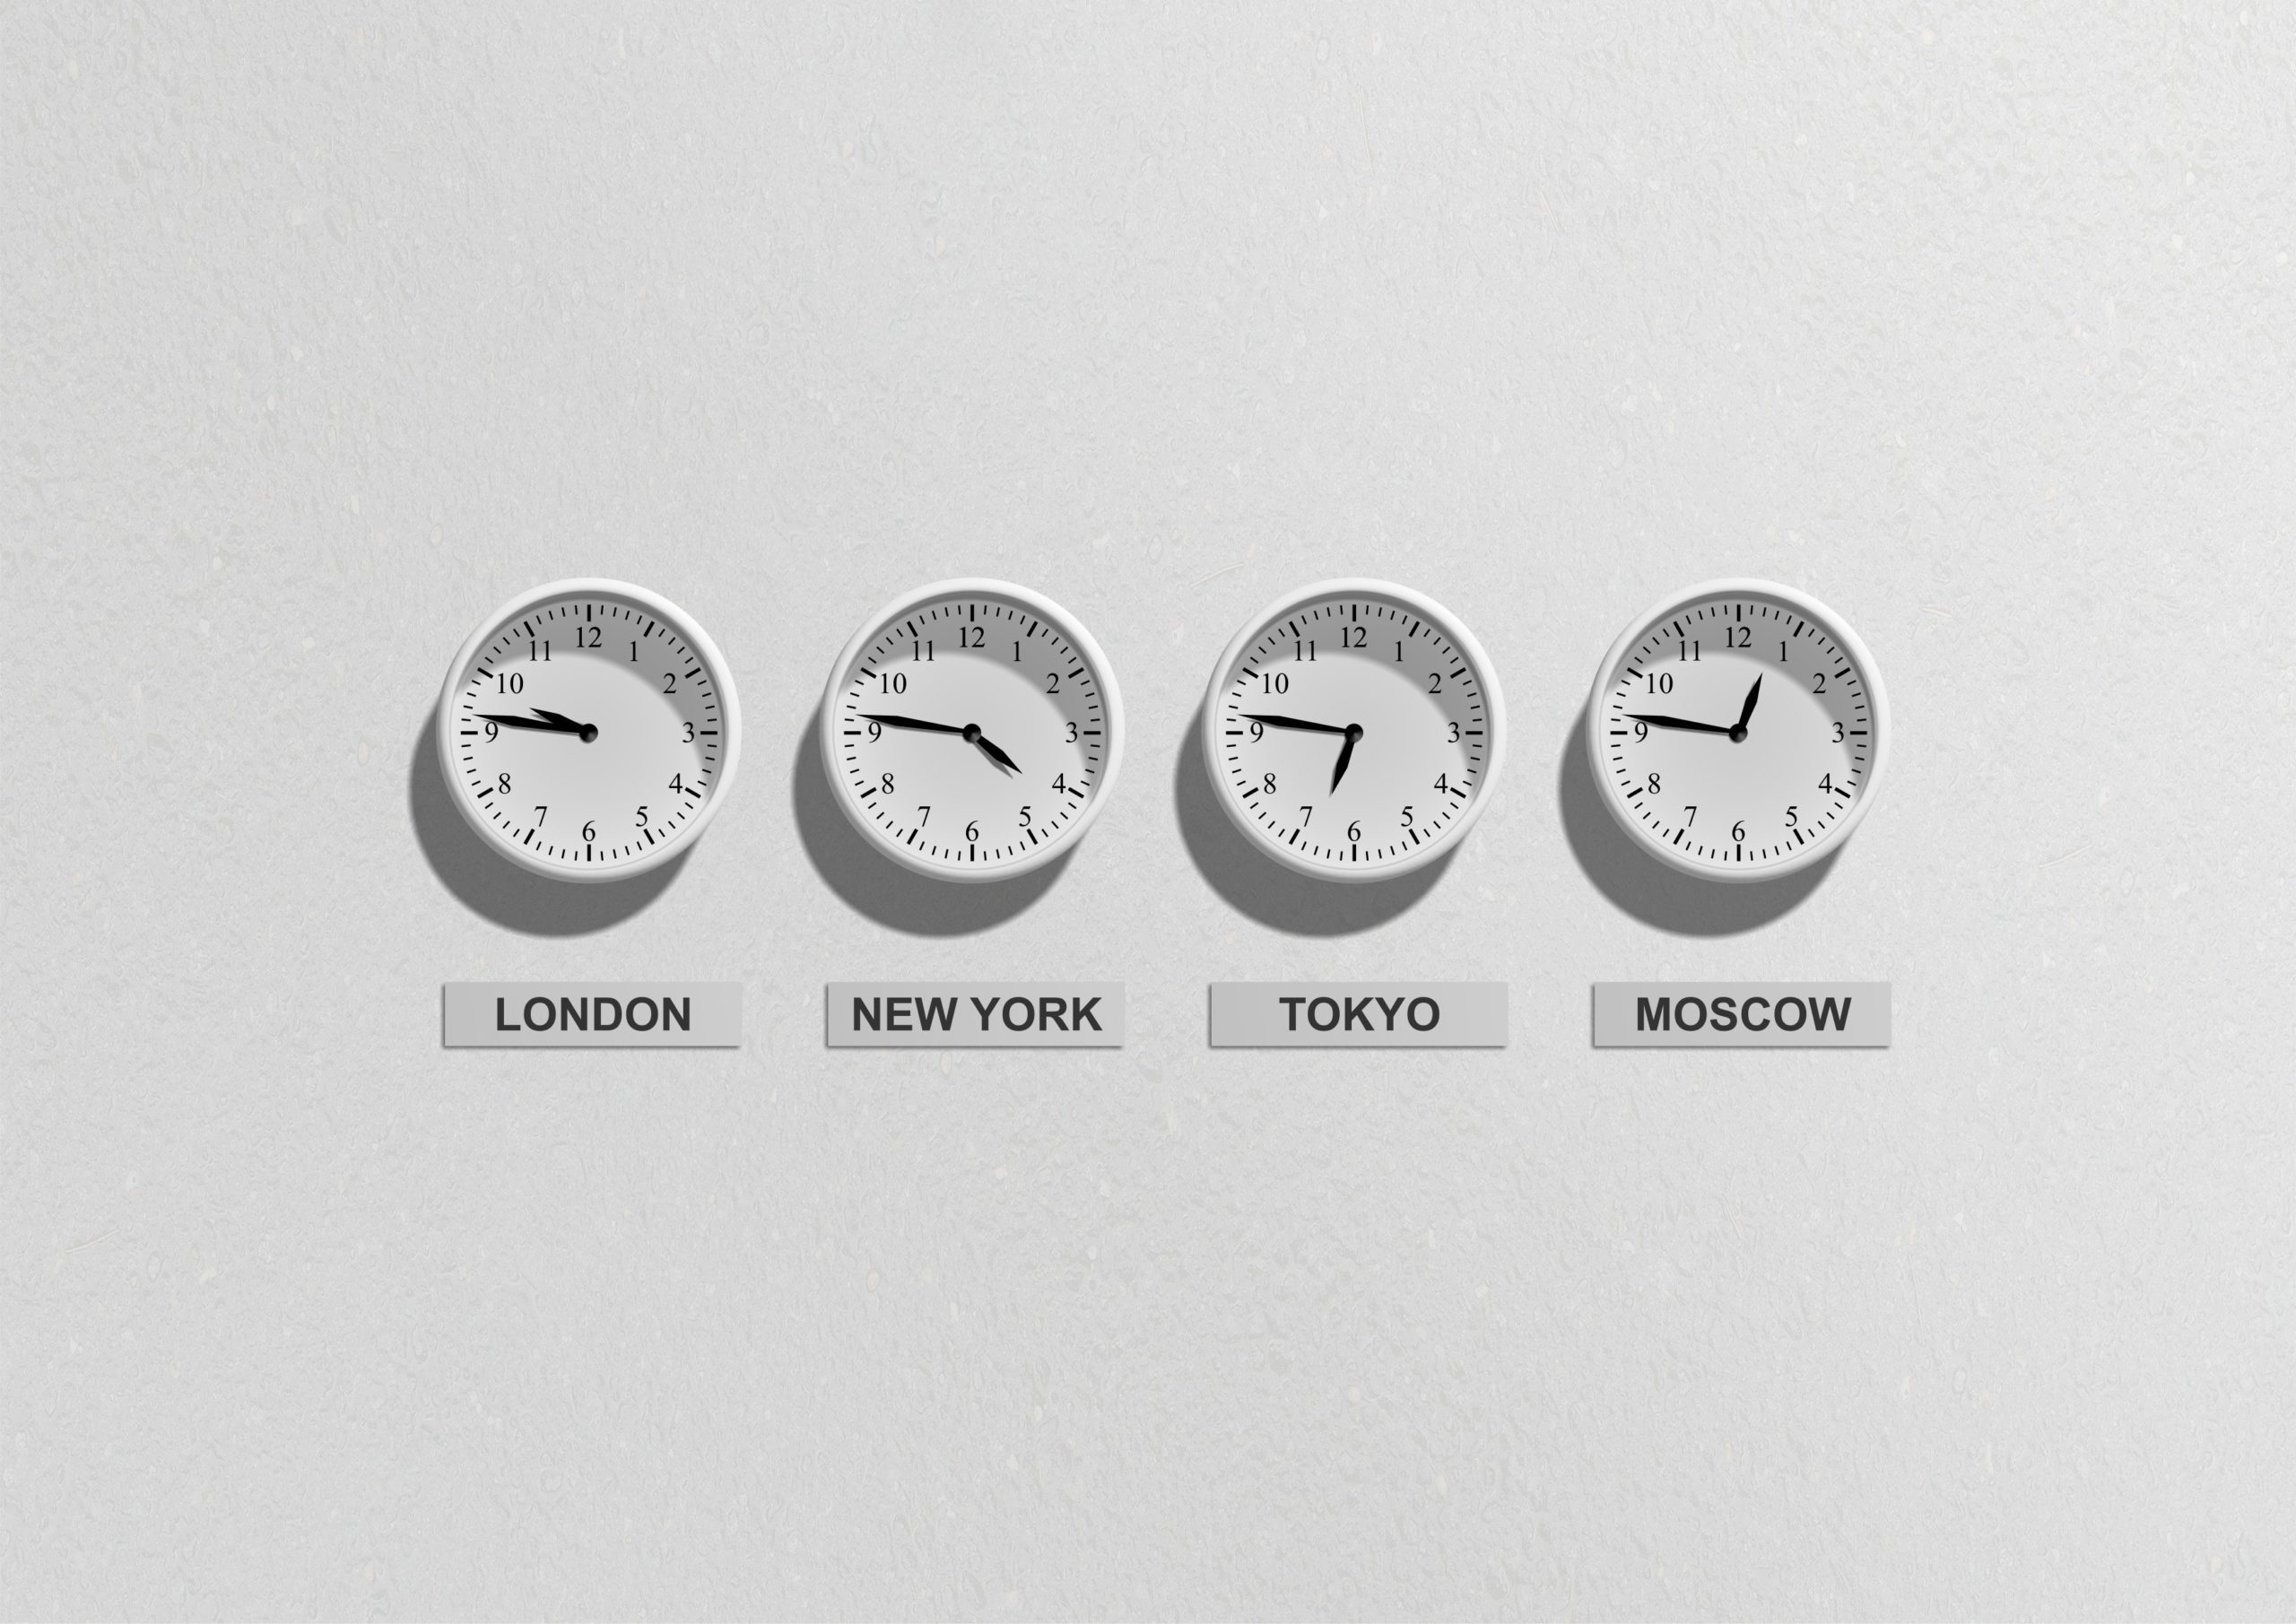 Should You Feature Rolling Time Zones in Your Event?